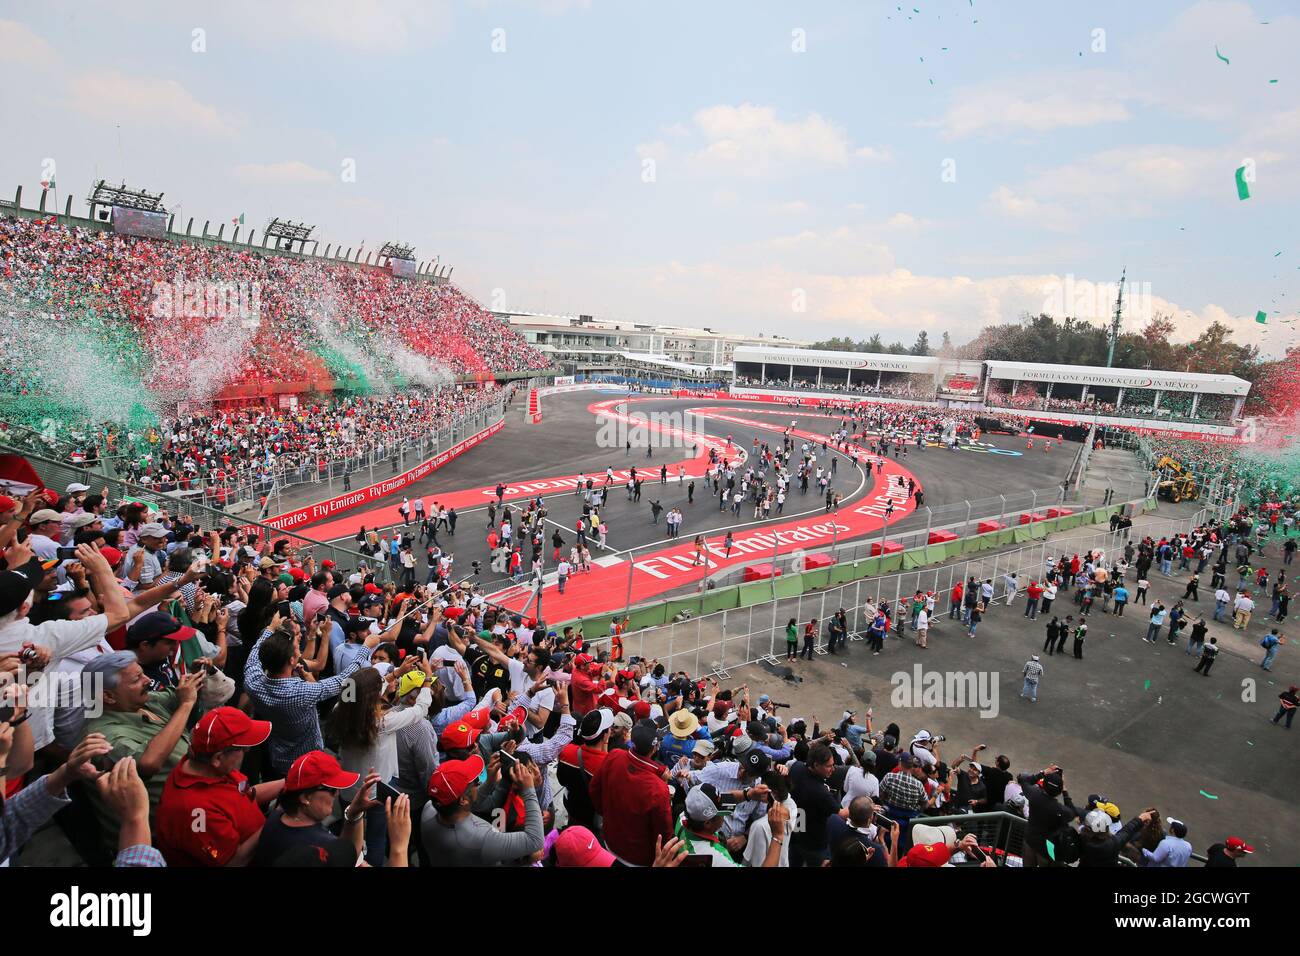 Ticker tape covers fans in the grandstand as the podium takes place. Mexican Grand Prix, Sunday 1st November 2015. Mexico City, Mexico. Stock Photo